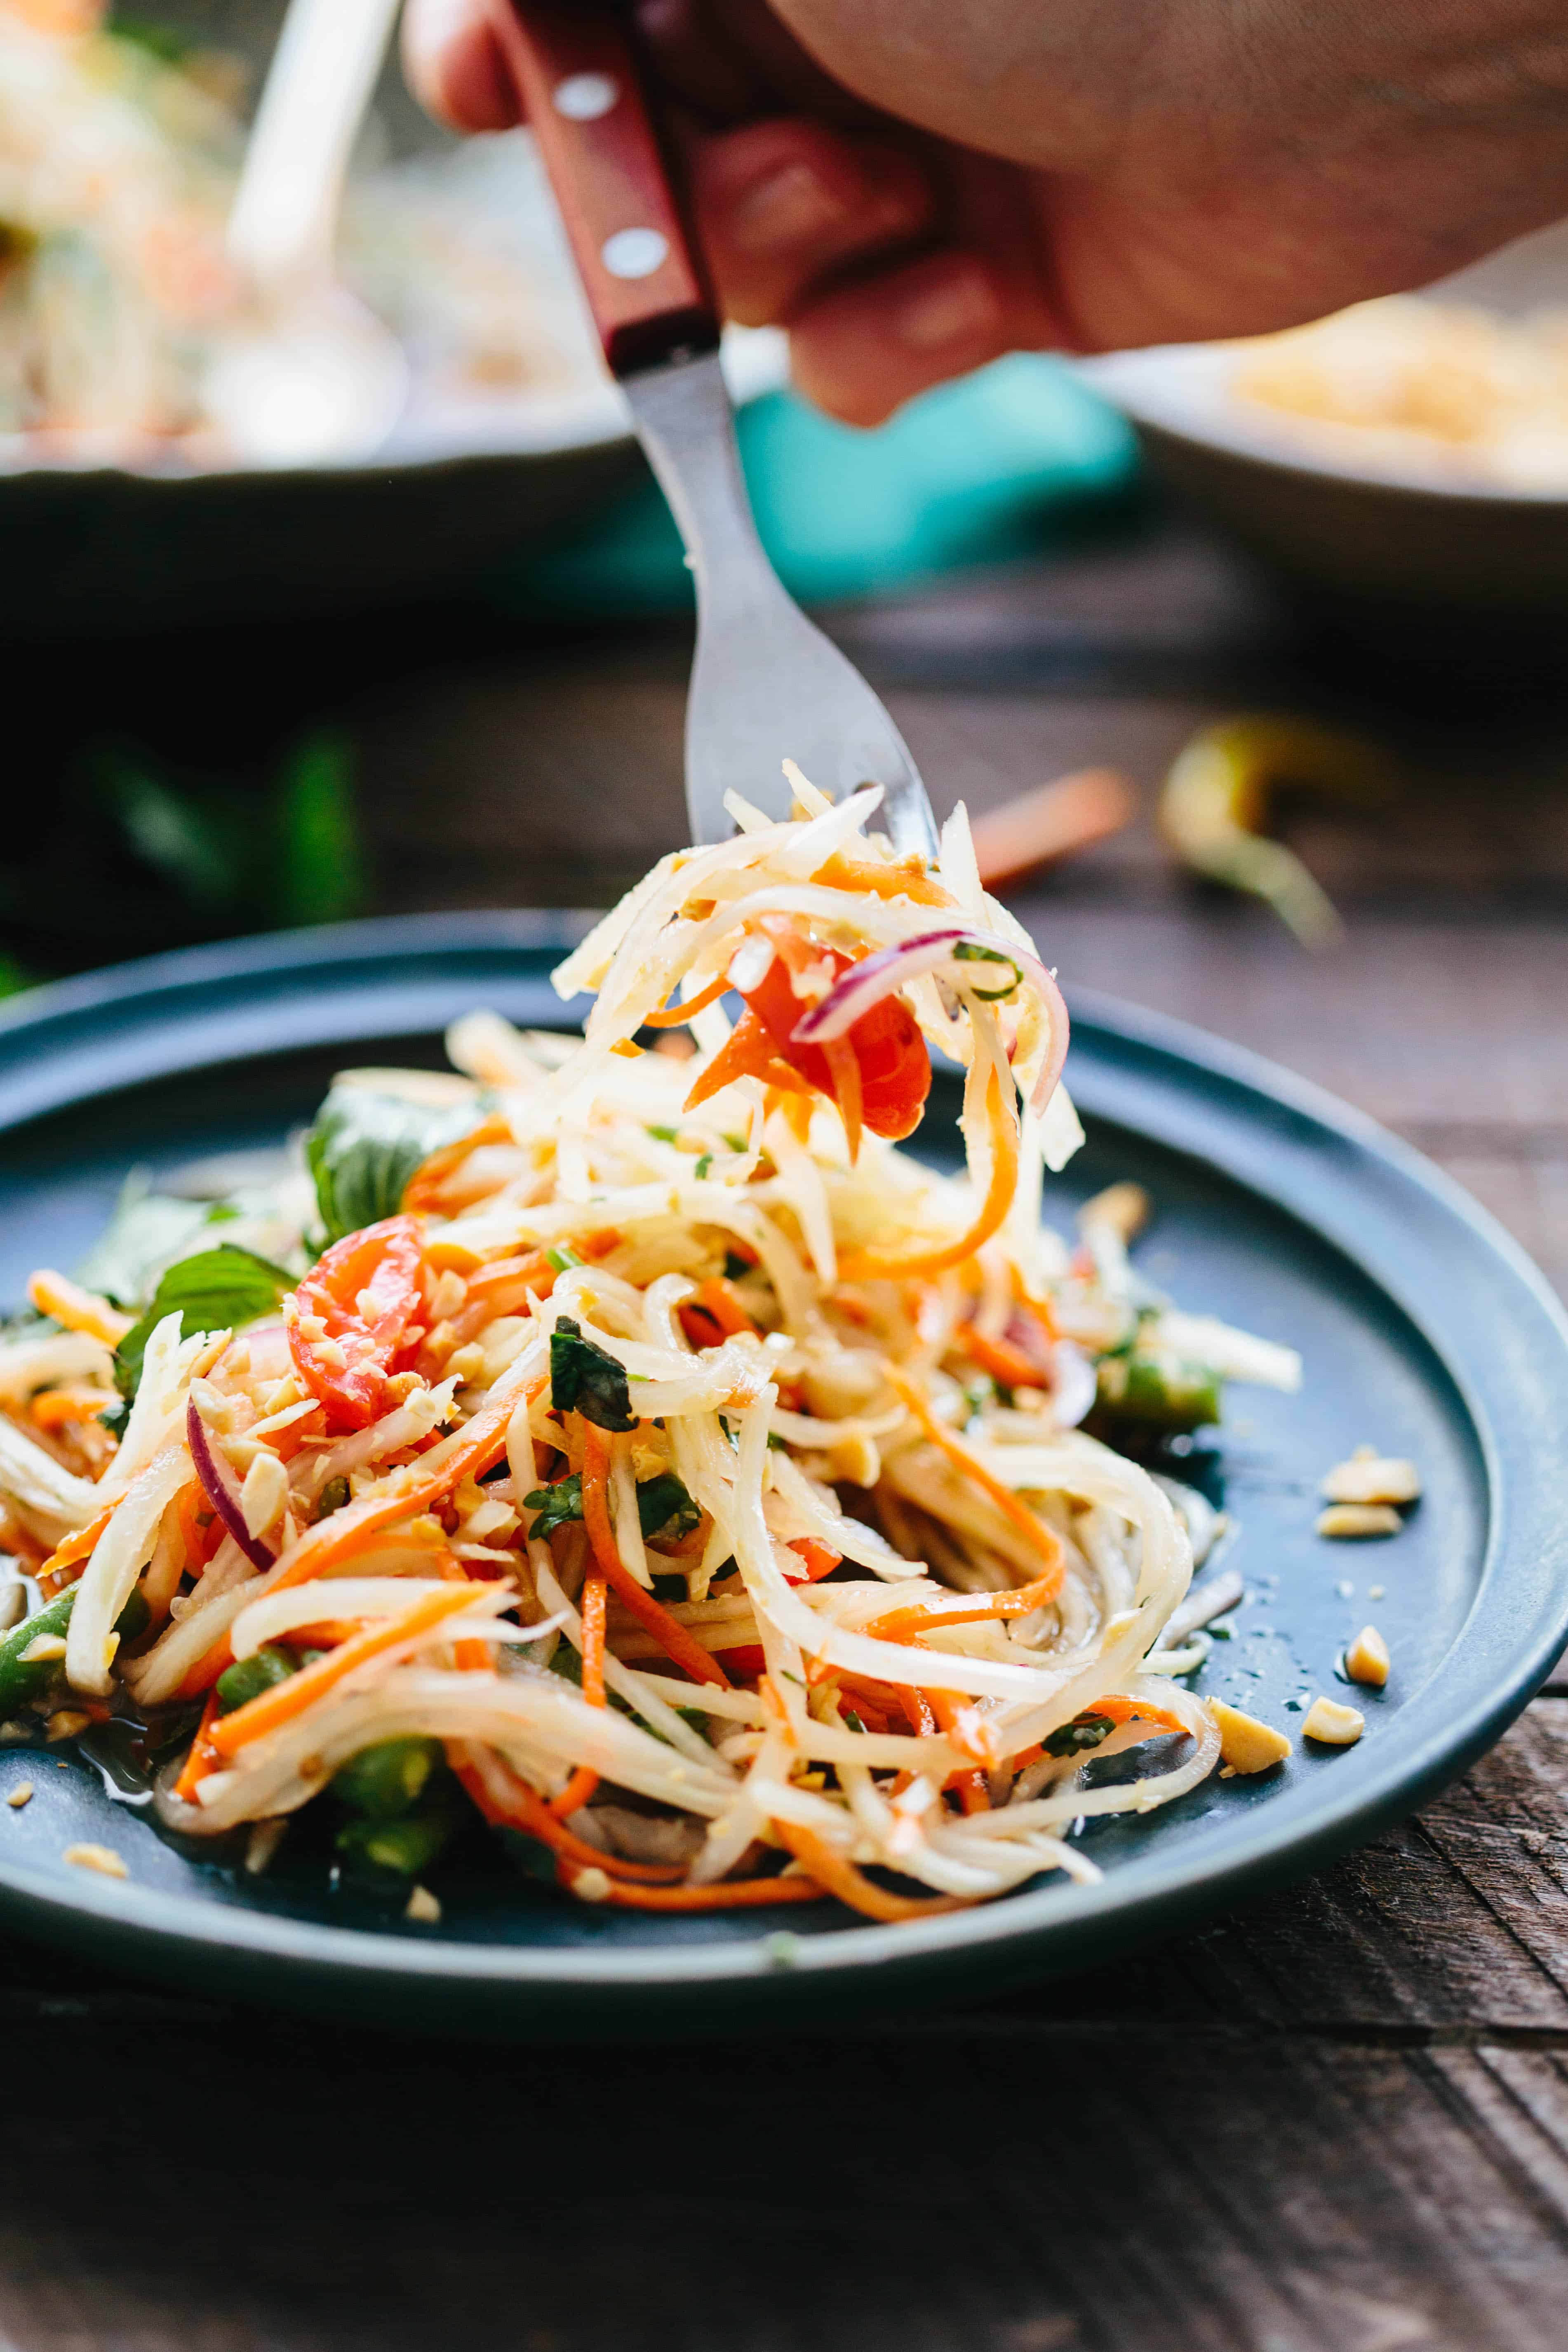 A fork pulling off a bite of shredded Thai green papaya salad from a plate.